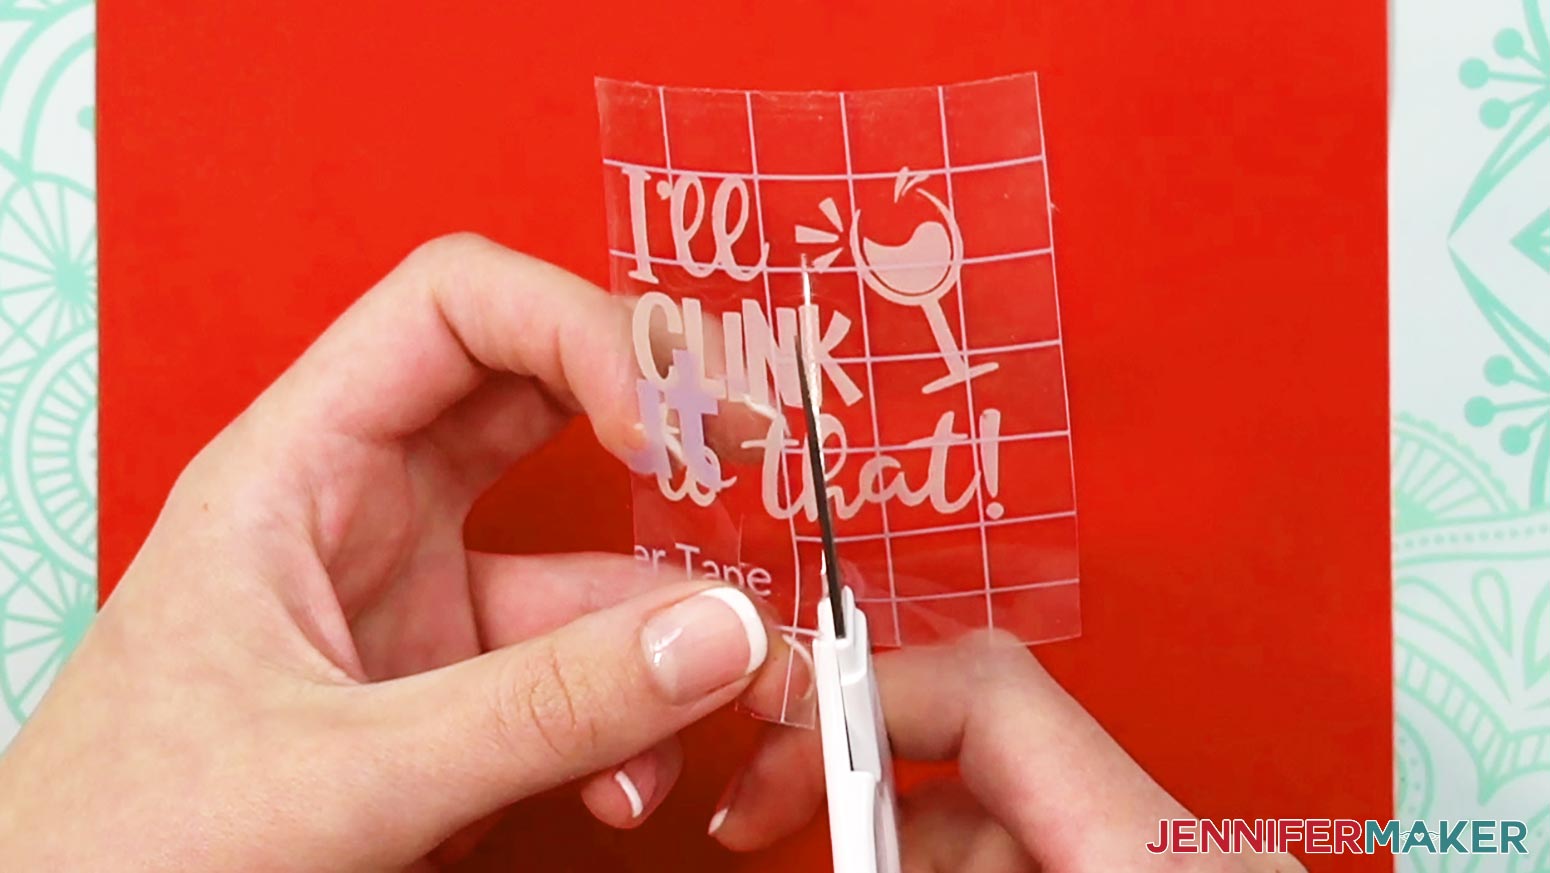 Cut the transfer tape close to the vinyl in multiple locations to allow it to apply more smoothly onto the curved glass.